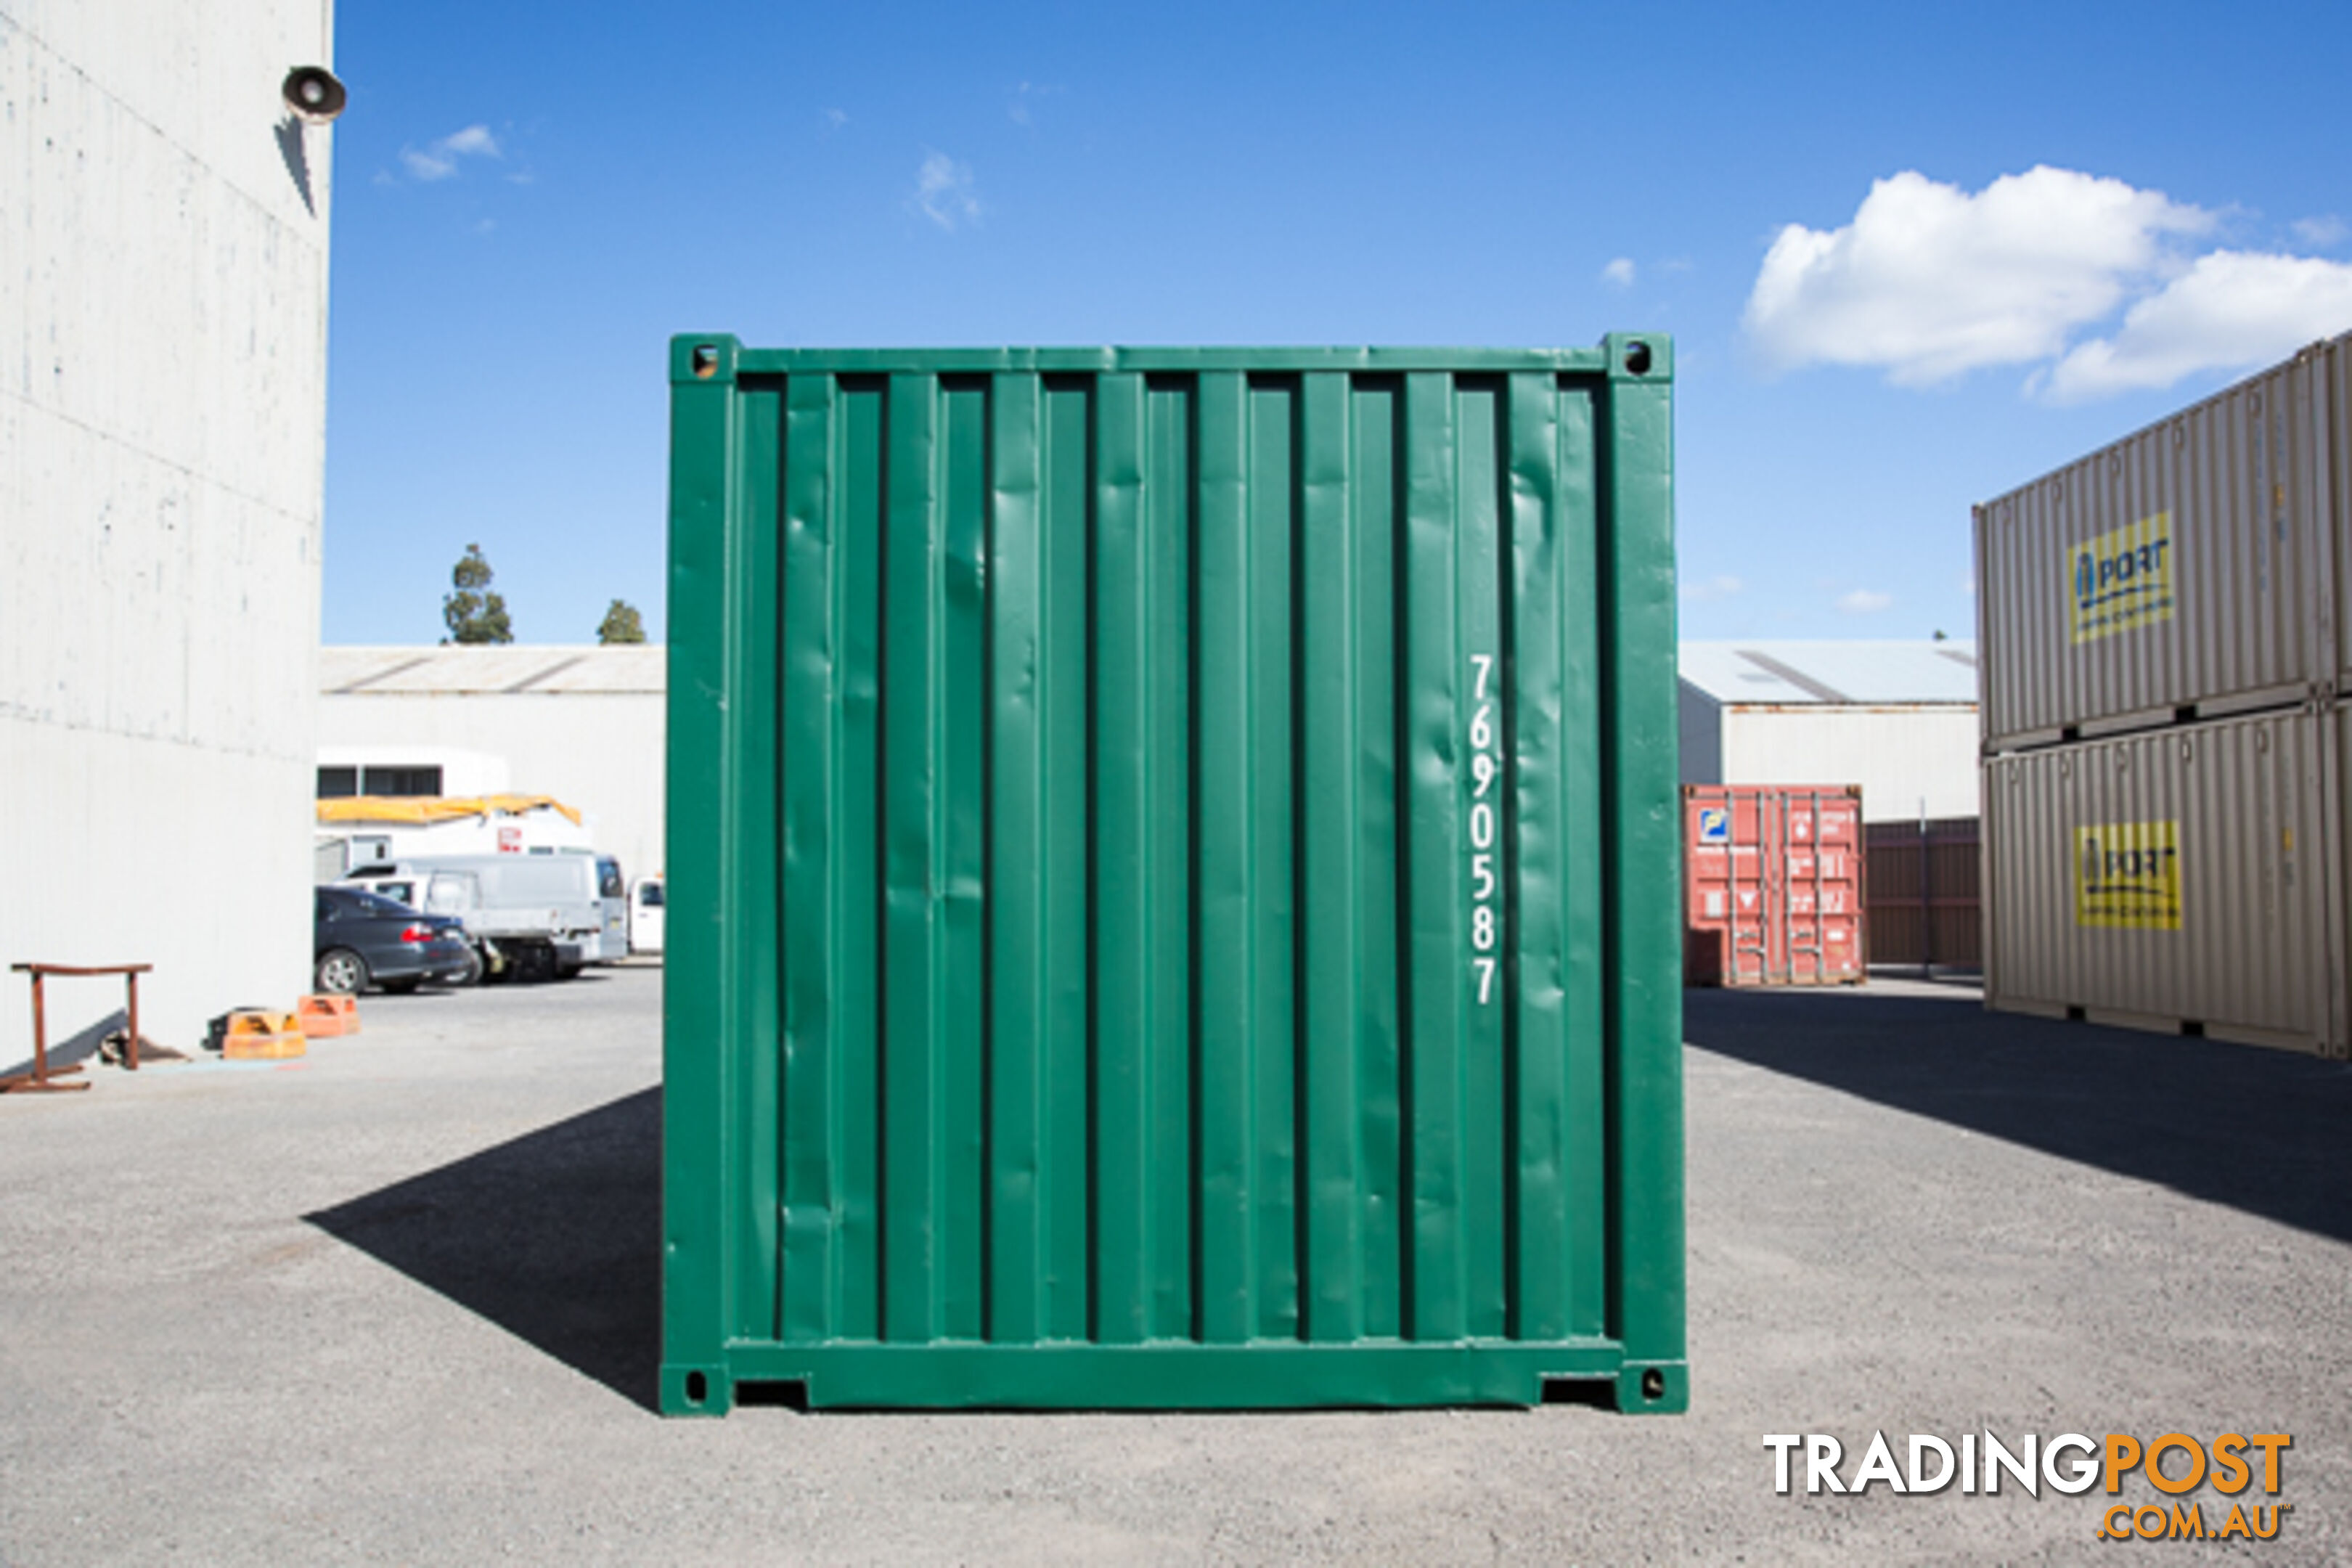 Refurbished Painted 20ft Shipping Containers Rockhampton - From $3900 + GST